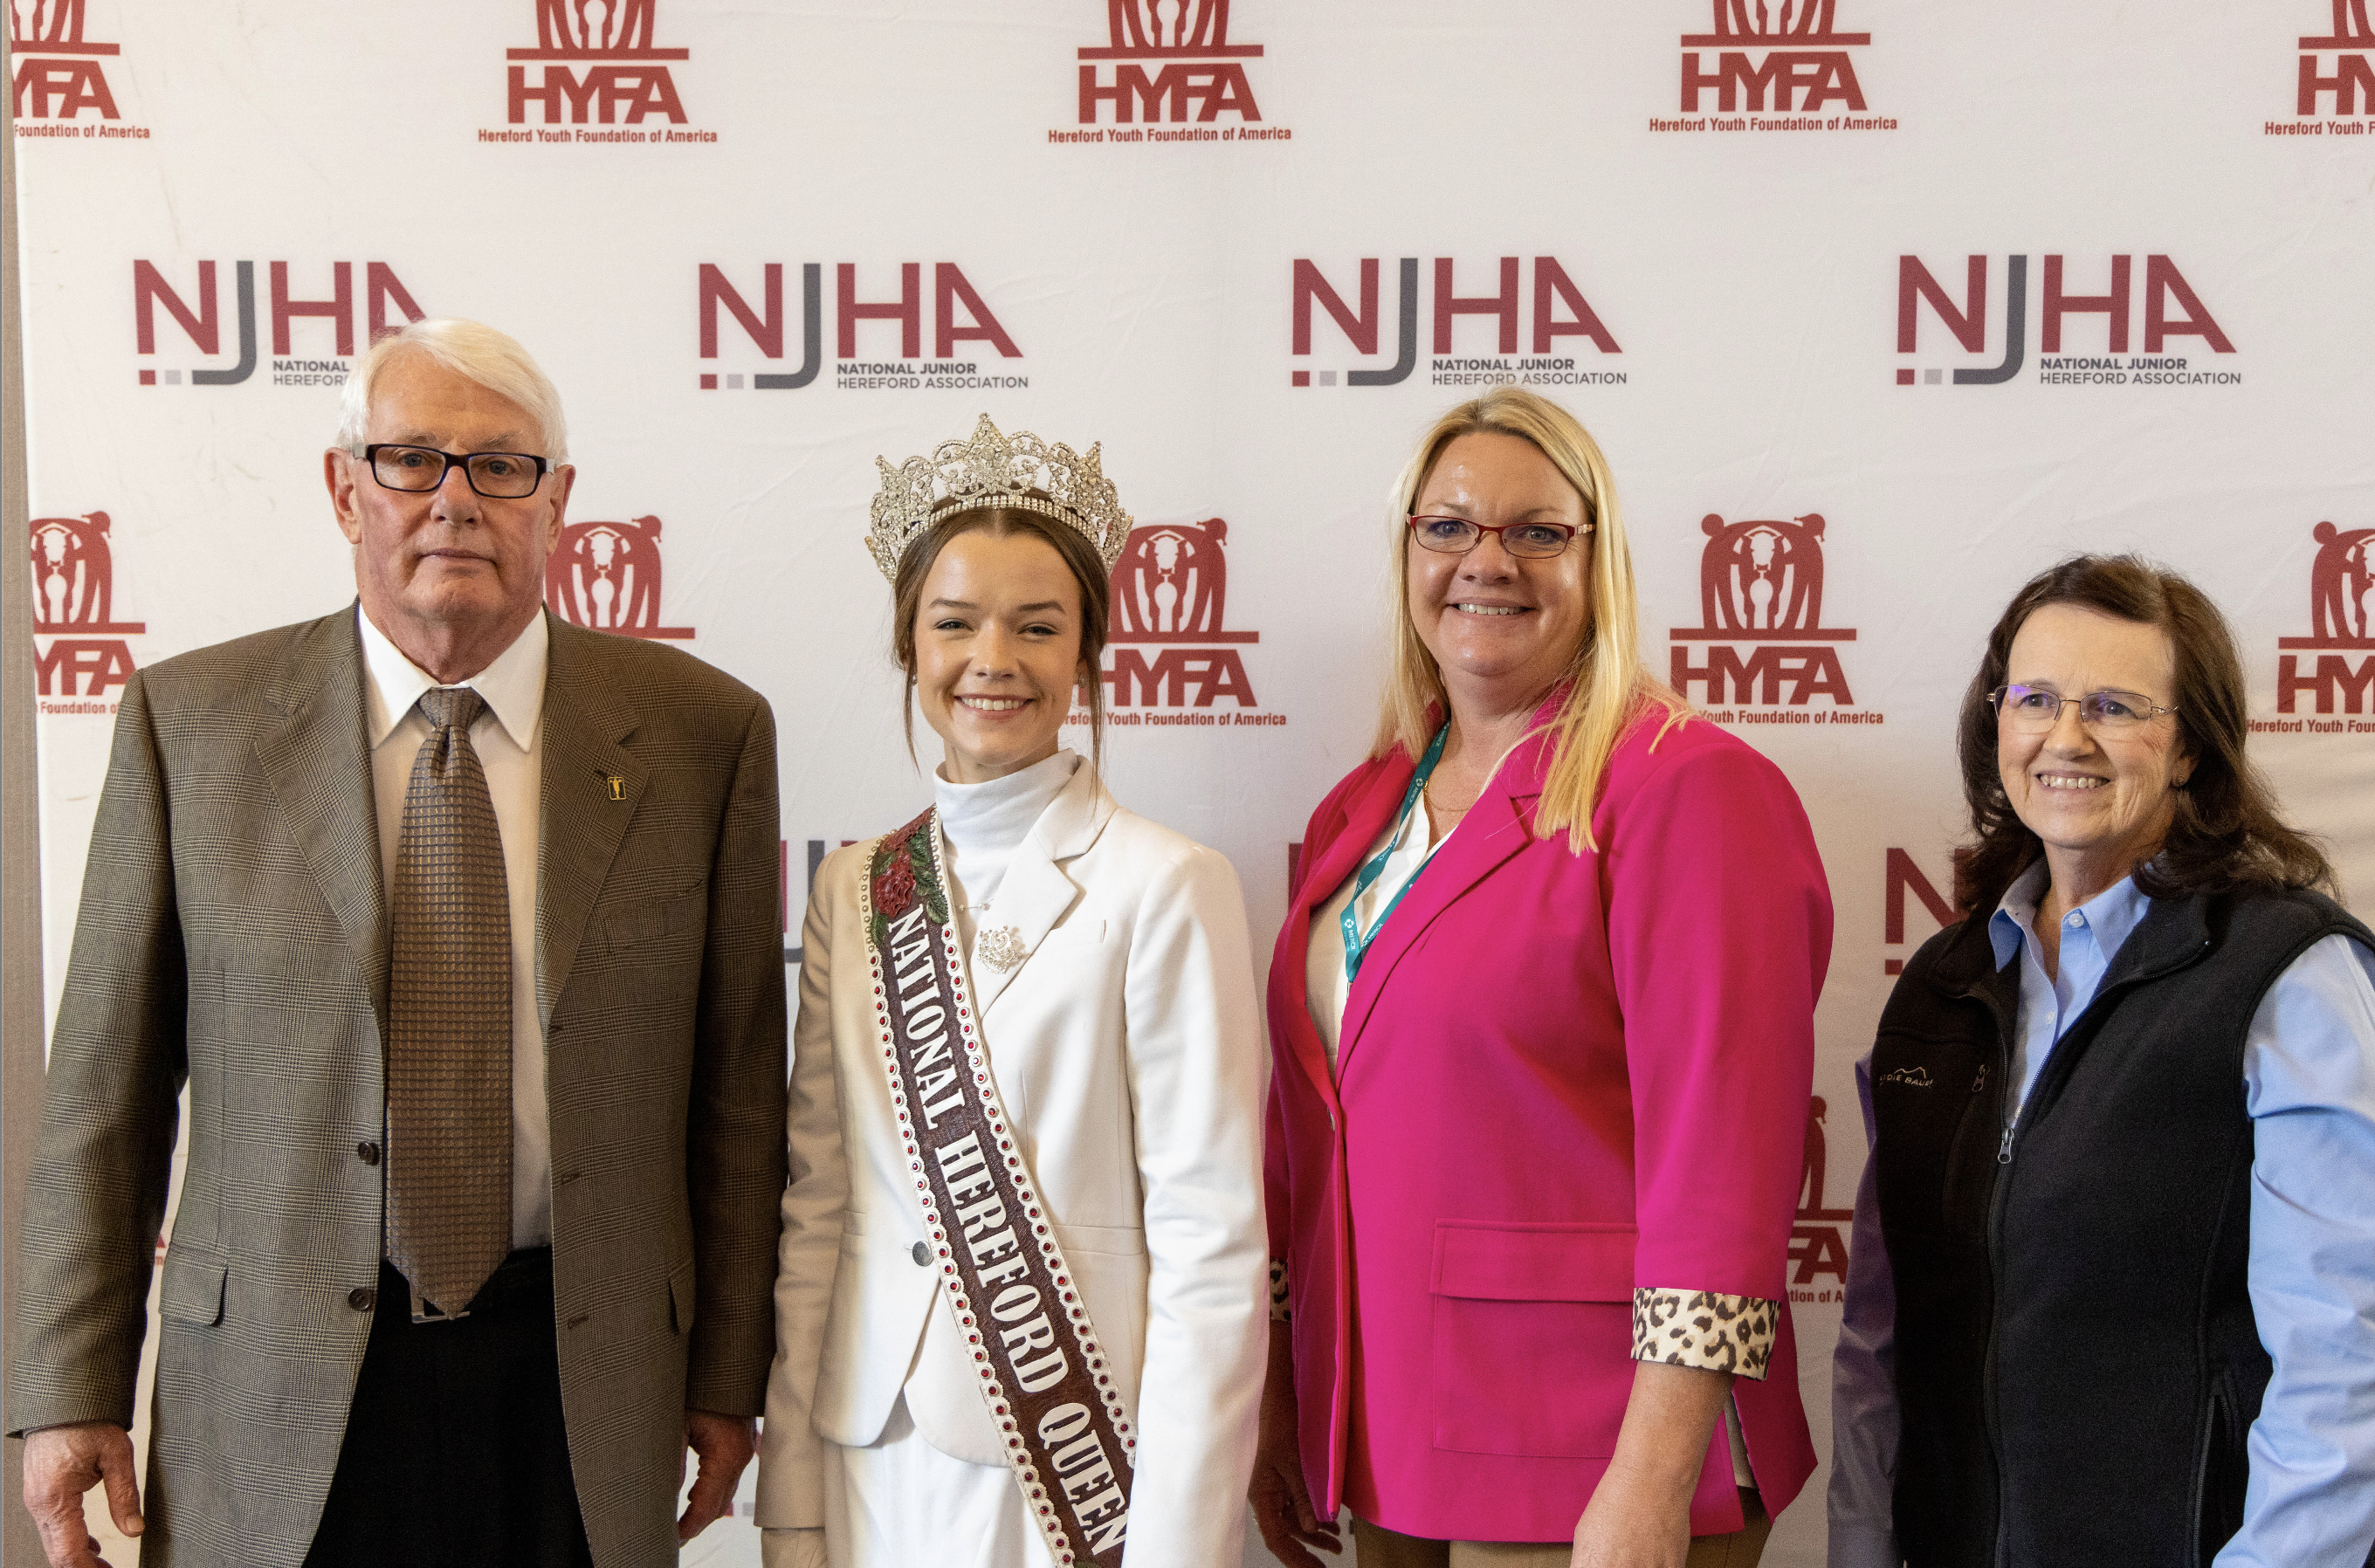 Gatz Receives Scholarship from National Hereford Women and HYFA